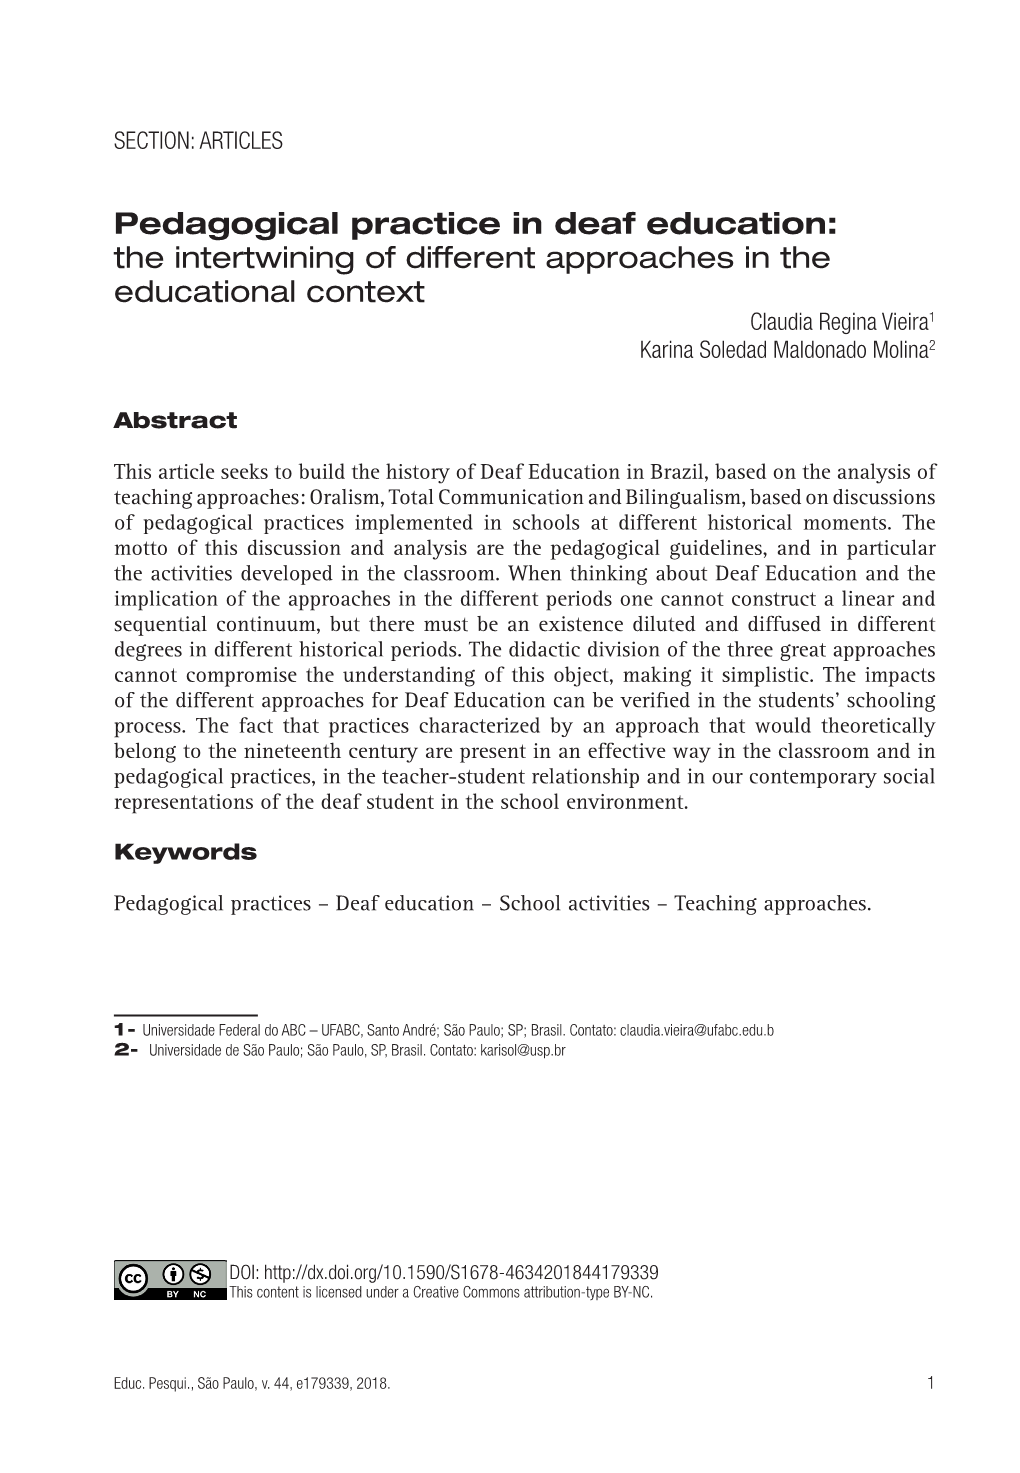 Pedagogical Practice in Deaf Education: the Intertwining of Different Approaches in the Educational Context Claudia Regina Vieira1 Karina Soledad Maldonado Molina2